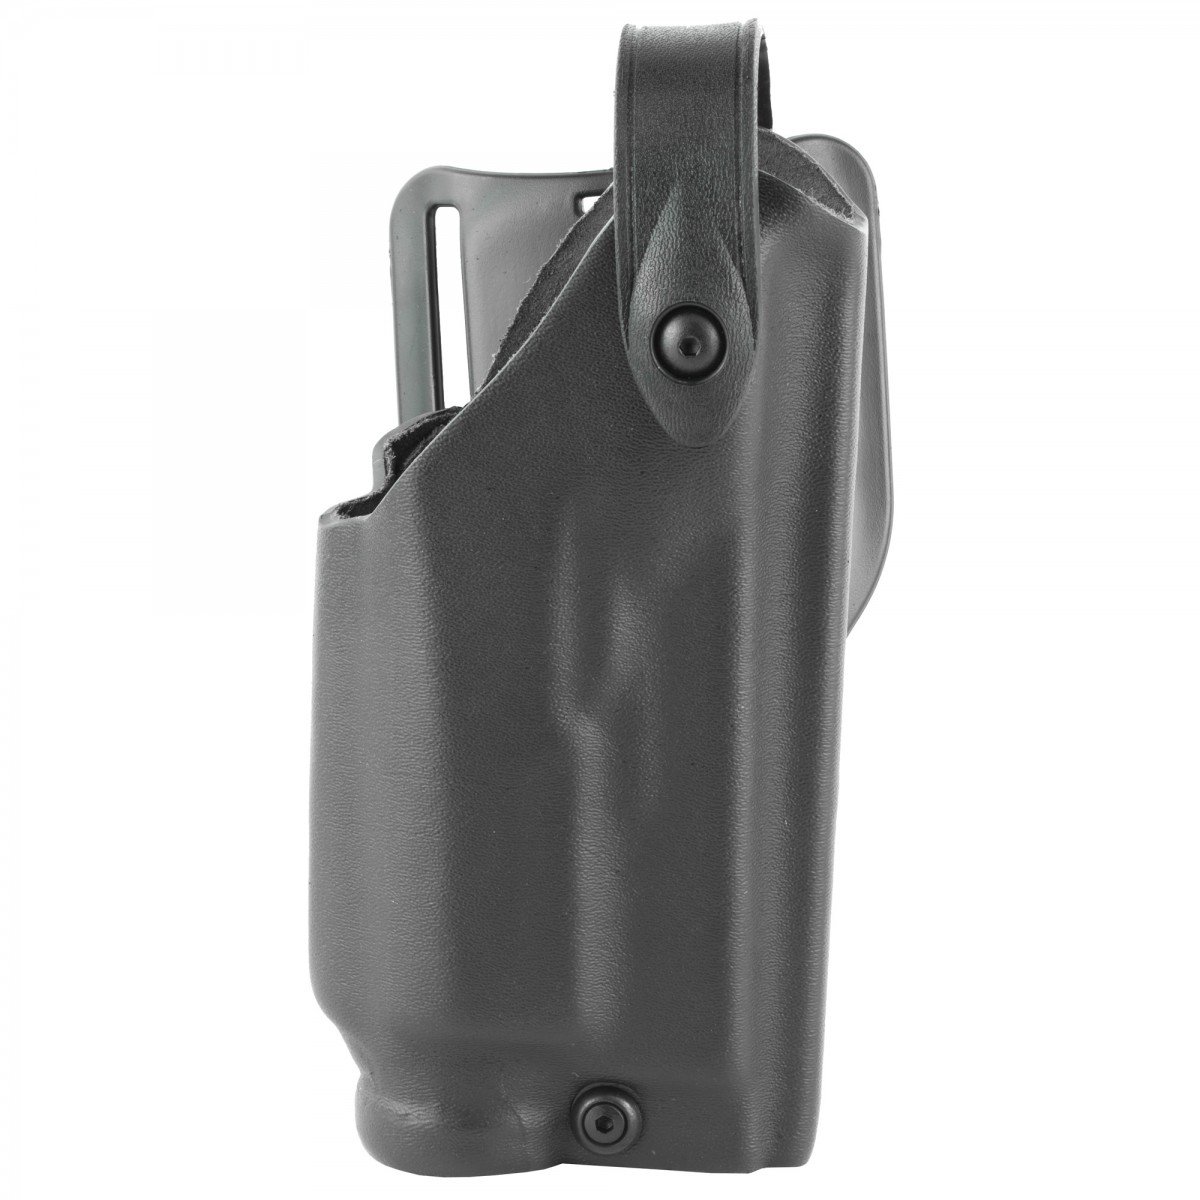 Safariland 6280 MidRide Holster for Glock 17/22/19/23 Pistols with